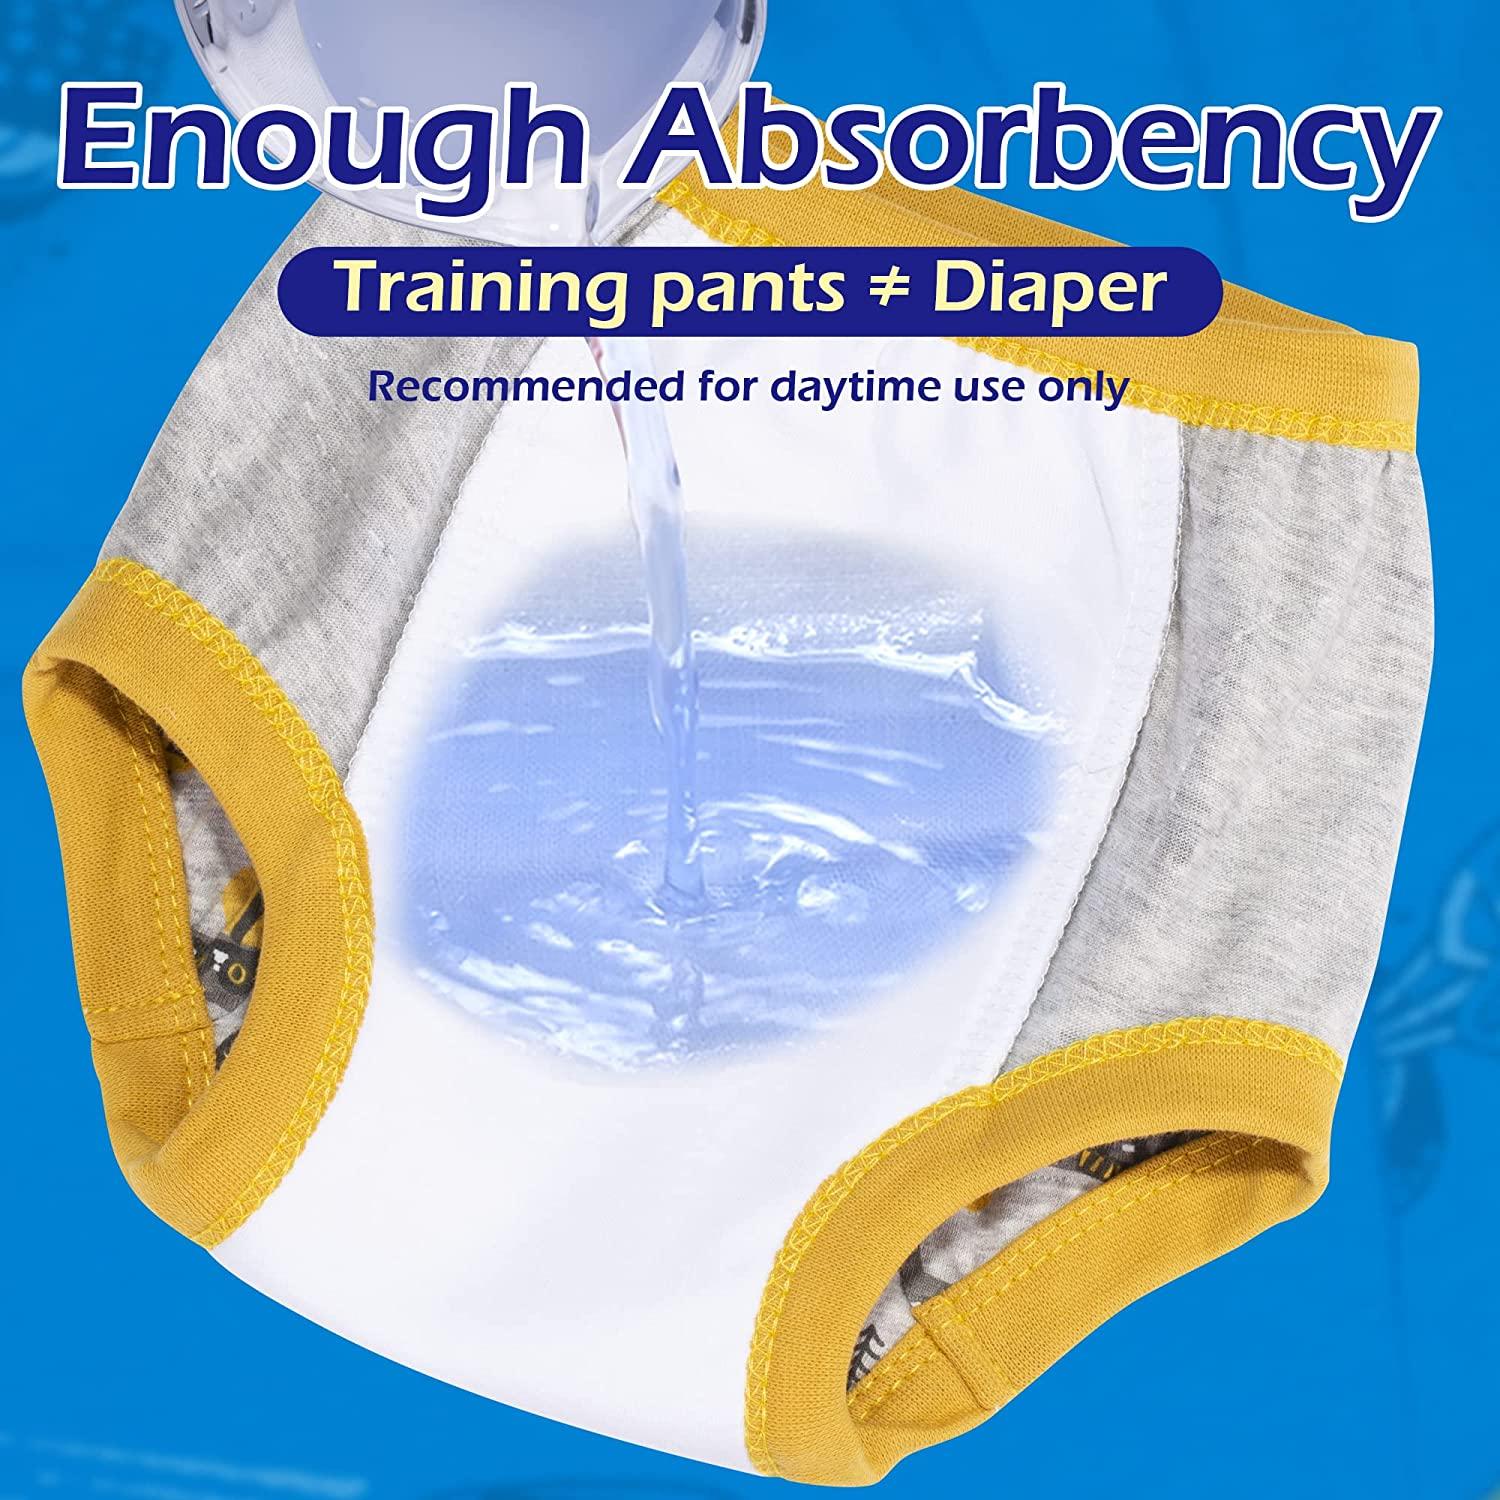 BIG ELEPHANT Toddler Potty Training Pants Baby Boys Underwear, 3T Car Group  3T (10 Count)